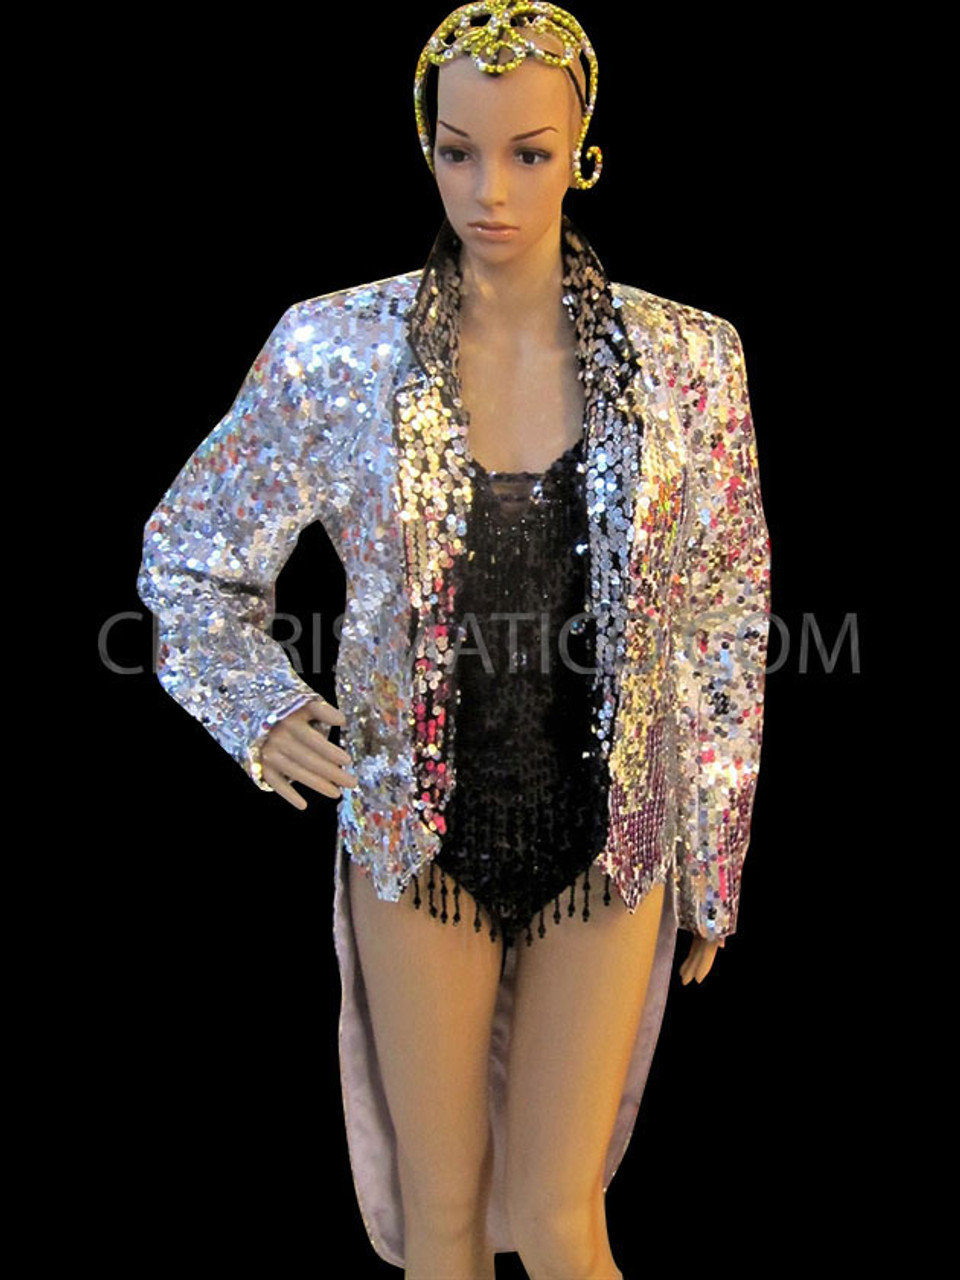 Diva's Sleek Iridescent Silver Sequined Tail Suit Jacket For Cabaret